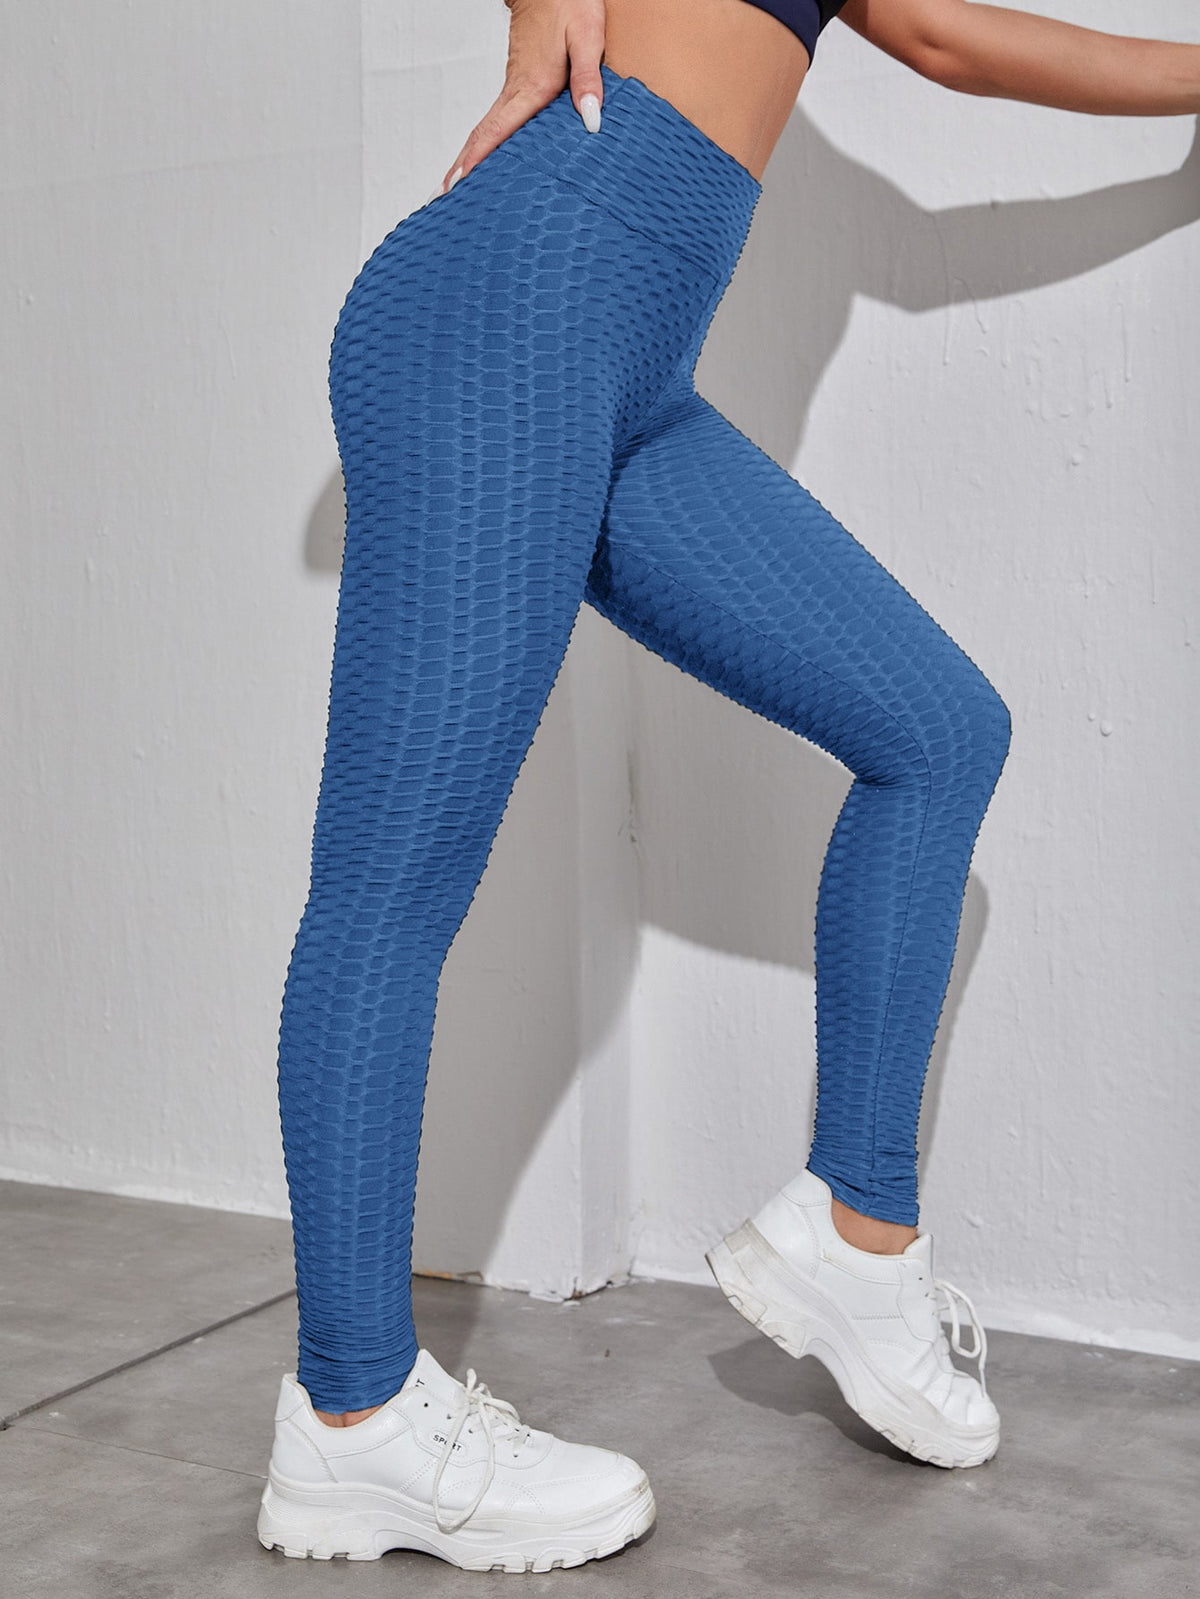 Solid Textured Sports Leggings